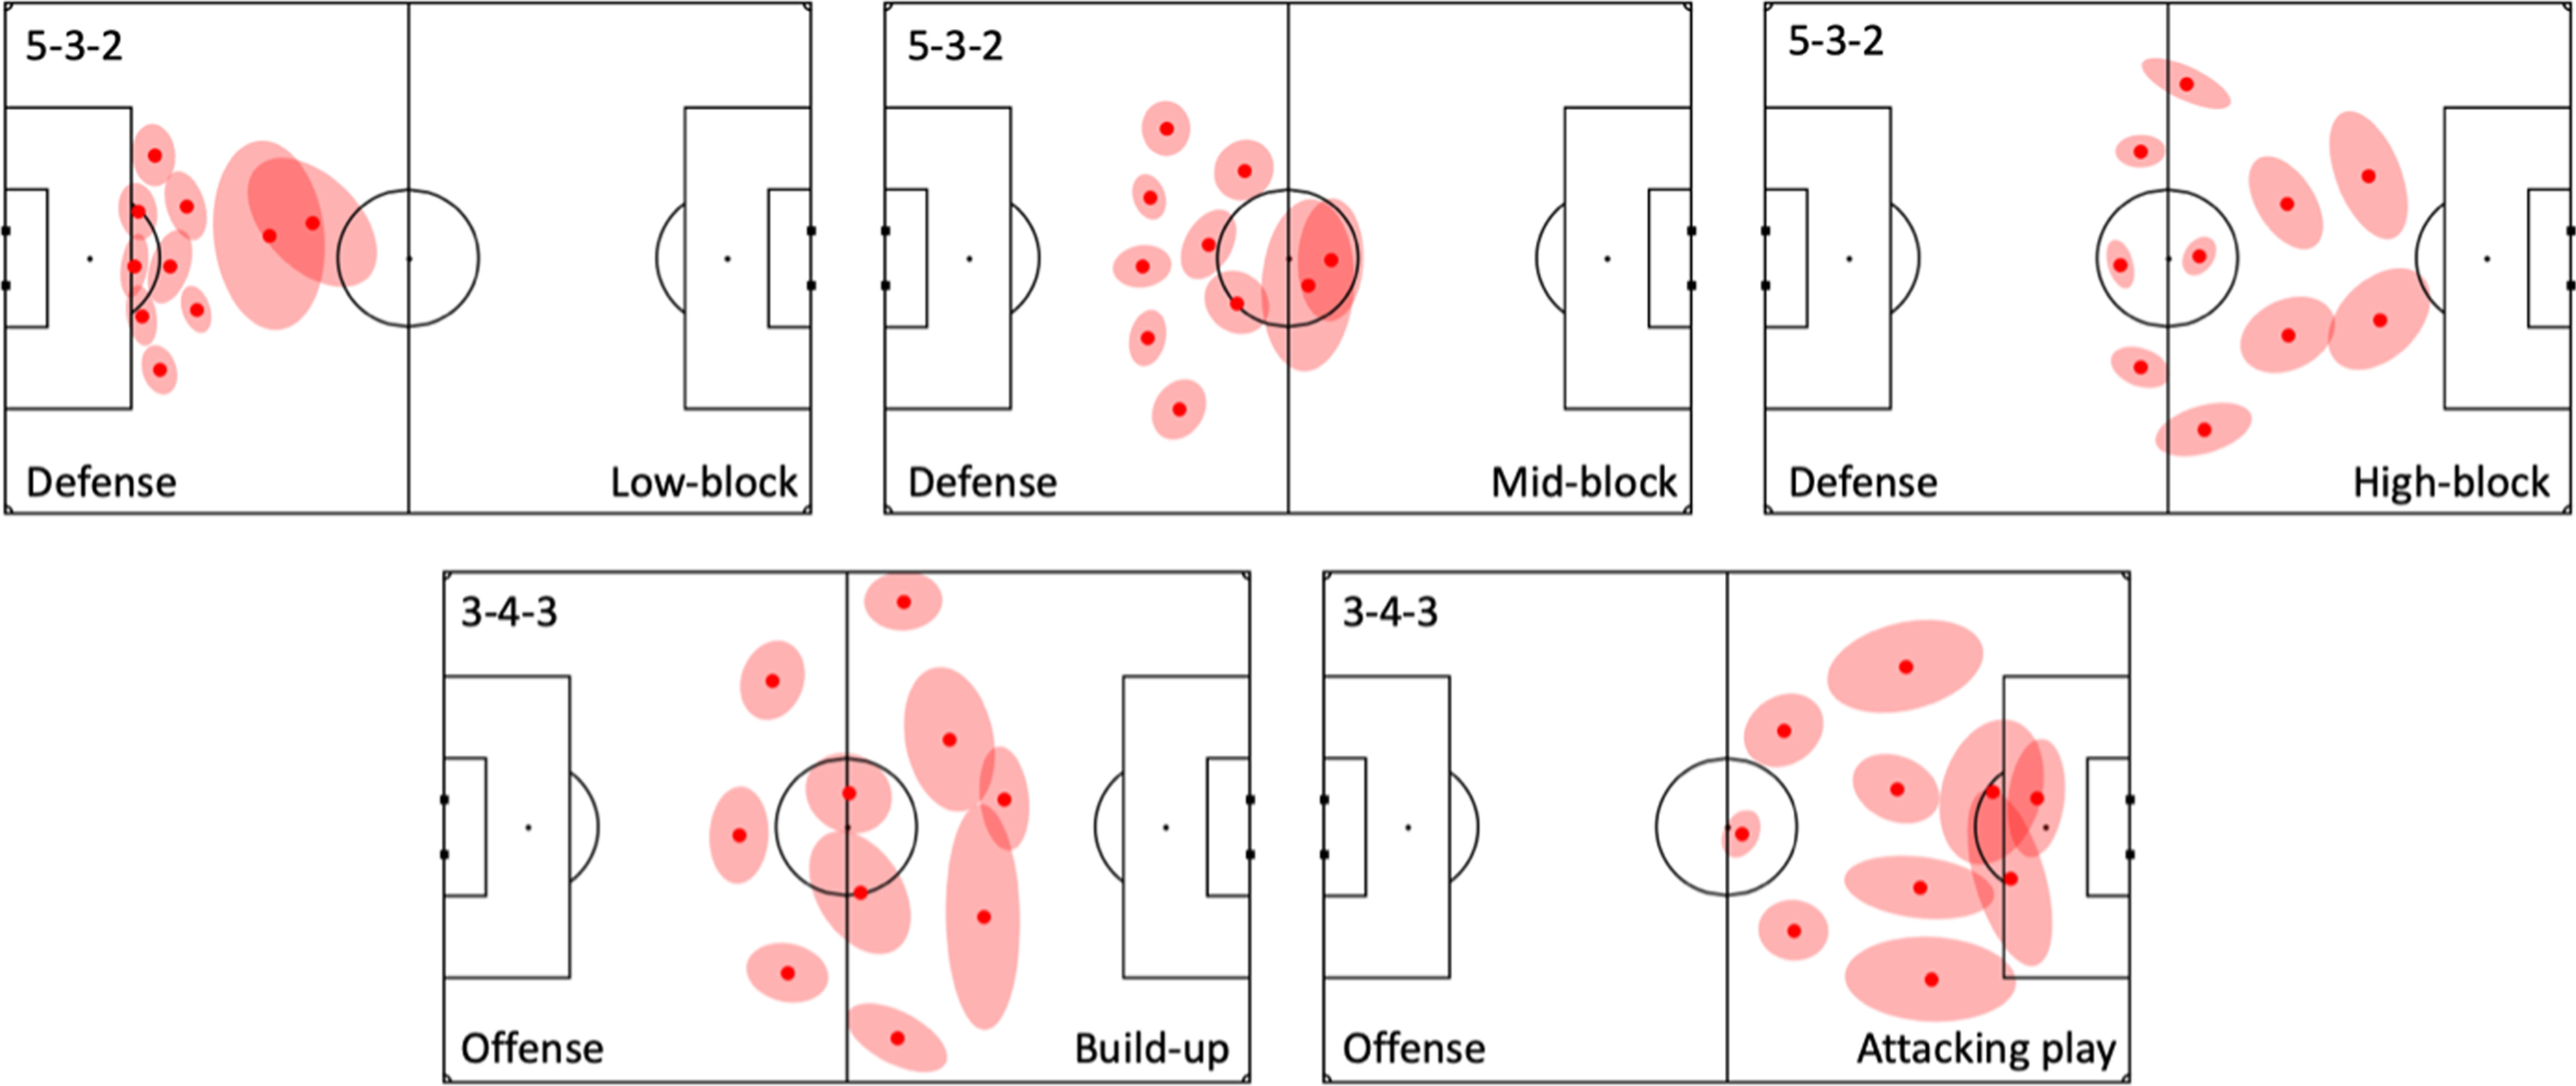 Average player positions of a team per tactical phase of play during one match. The ellipses provide an estimate of how far the player would tend to move from their average position during each phase of play. The considered team plays from left to right. Player’s positions are collected by optical tracking systems at 25 Hz (positional data). For this figure only data until the first substitution was used.